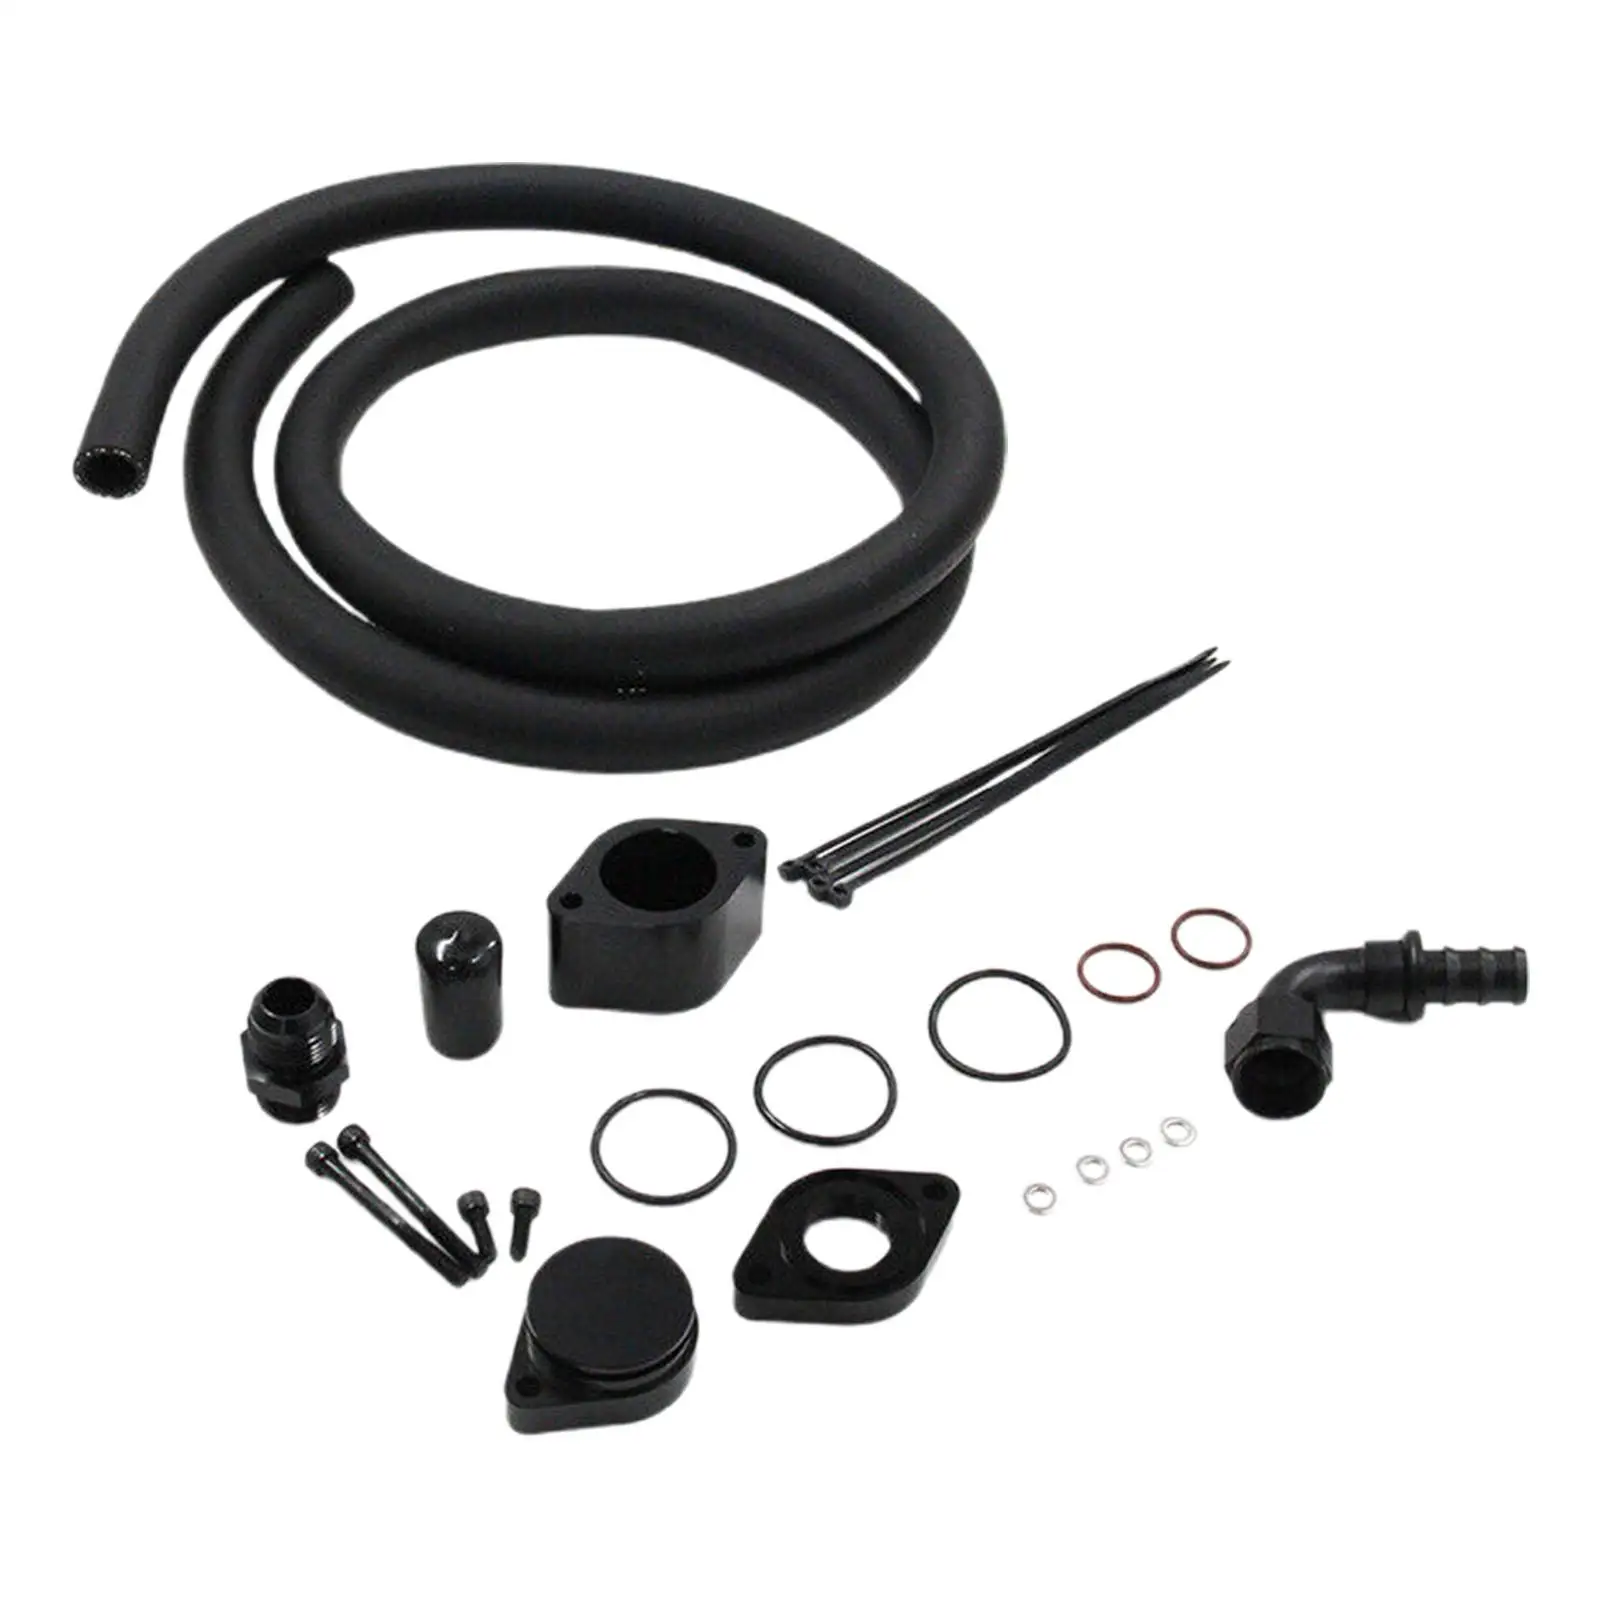 Engine Ventilation Kit Replacement High Performance for Super Duty 11-20 6.7L